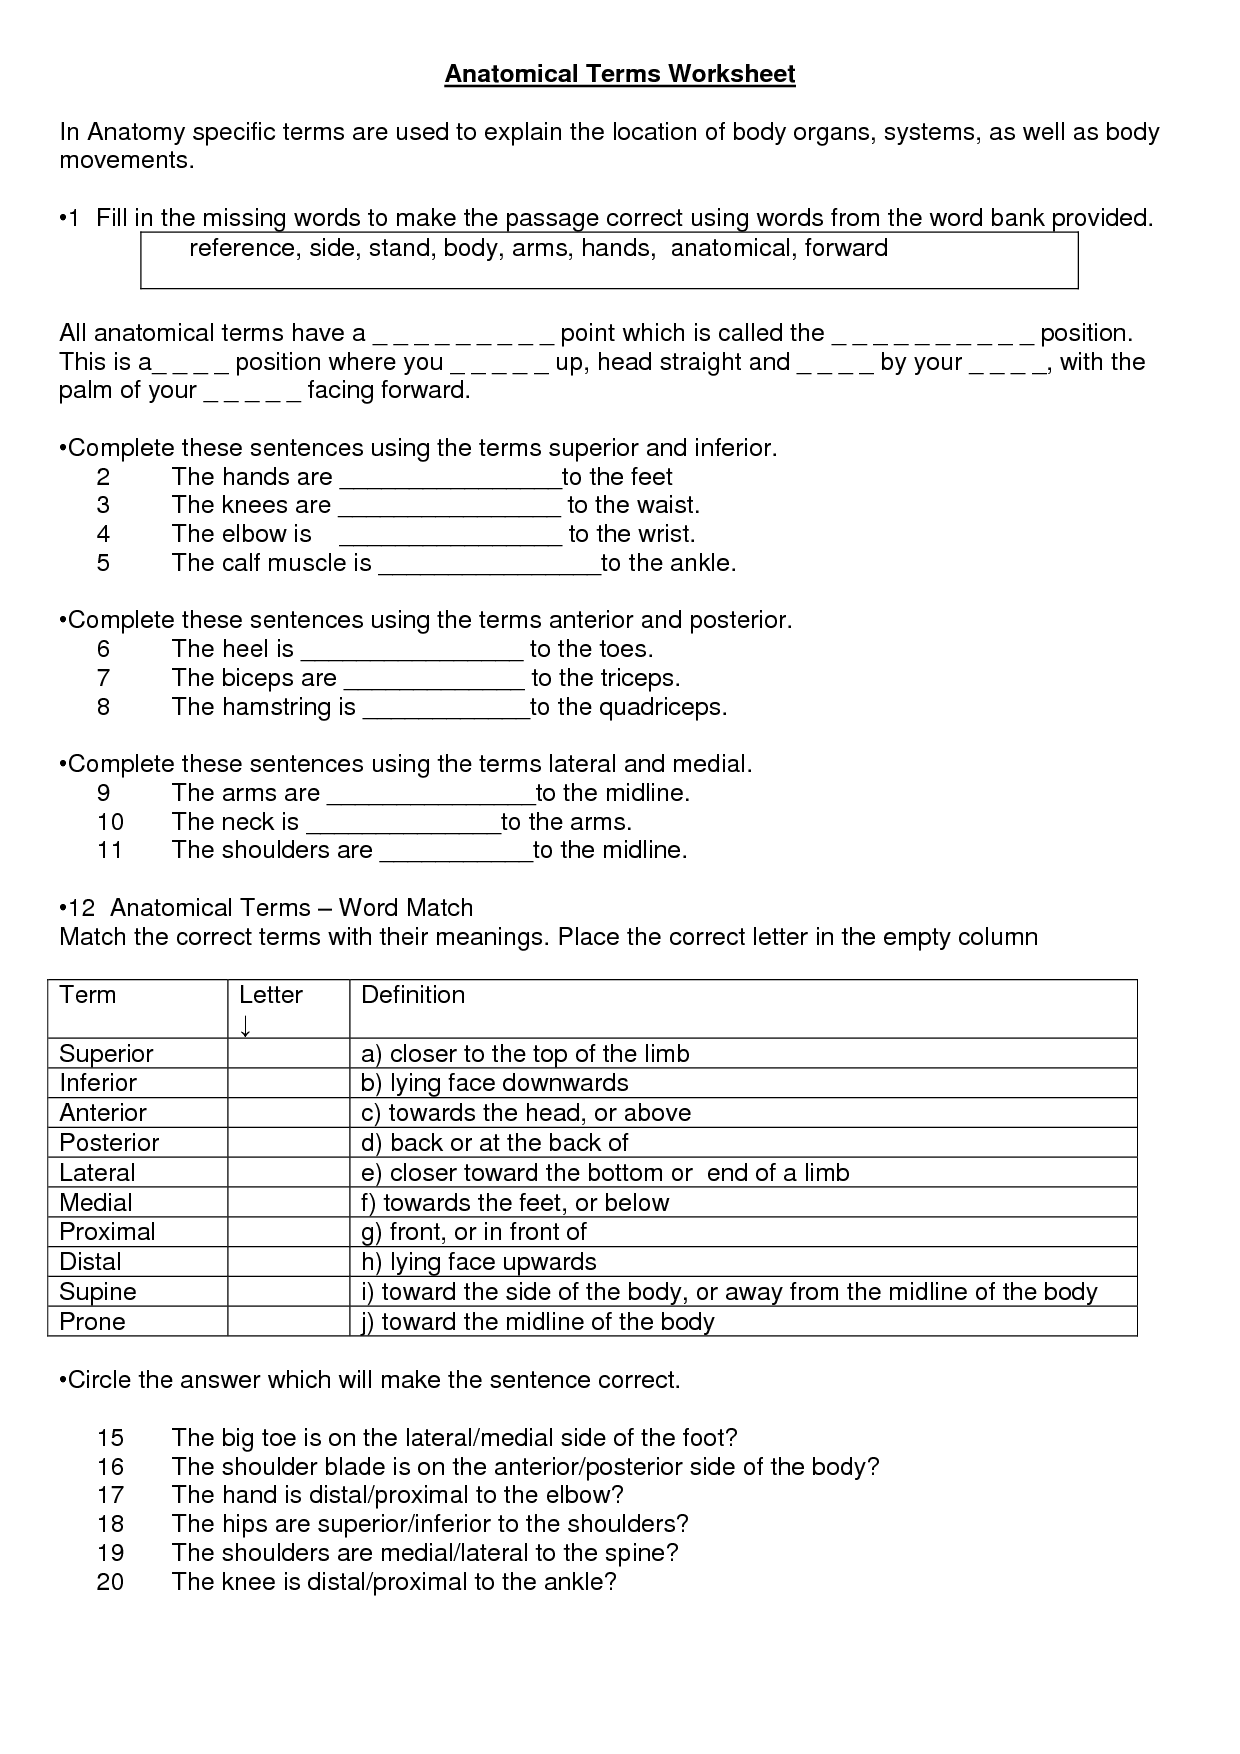 15-best-images-of-structure-of-the-heart-worksheet-4-chambers-of-the-heart-worksheet-label